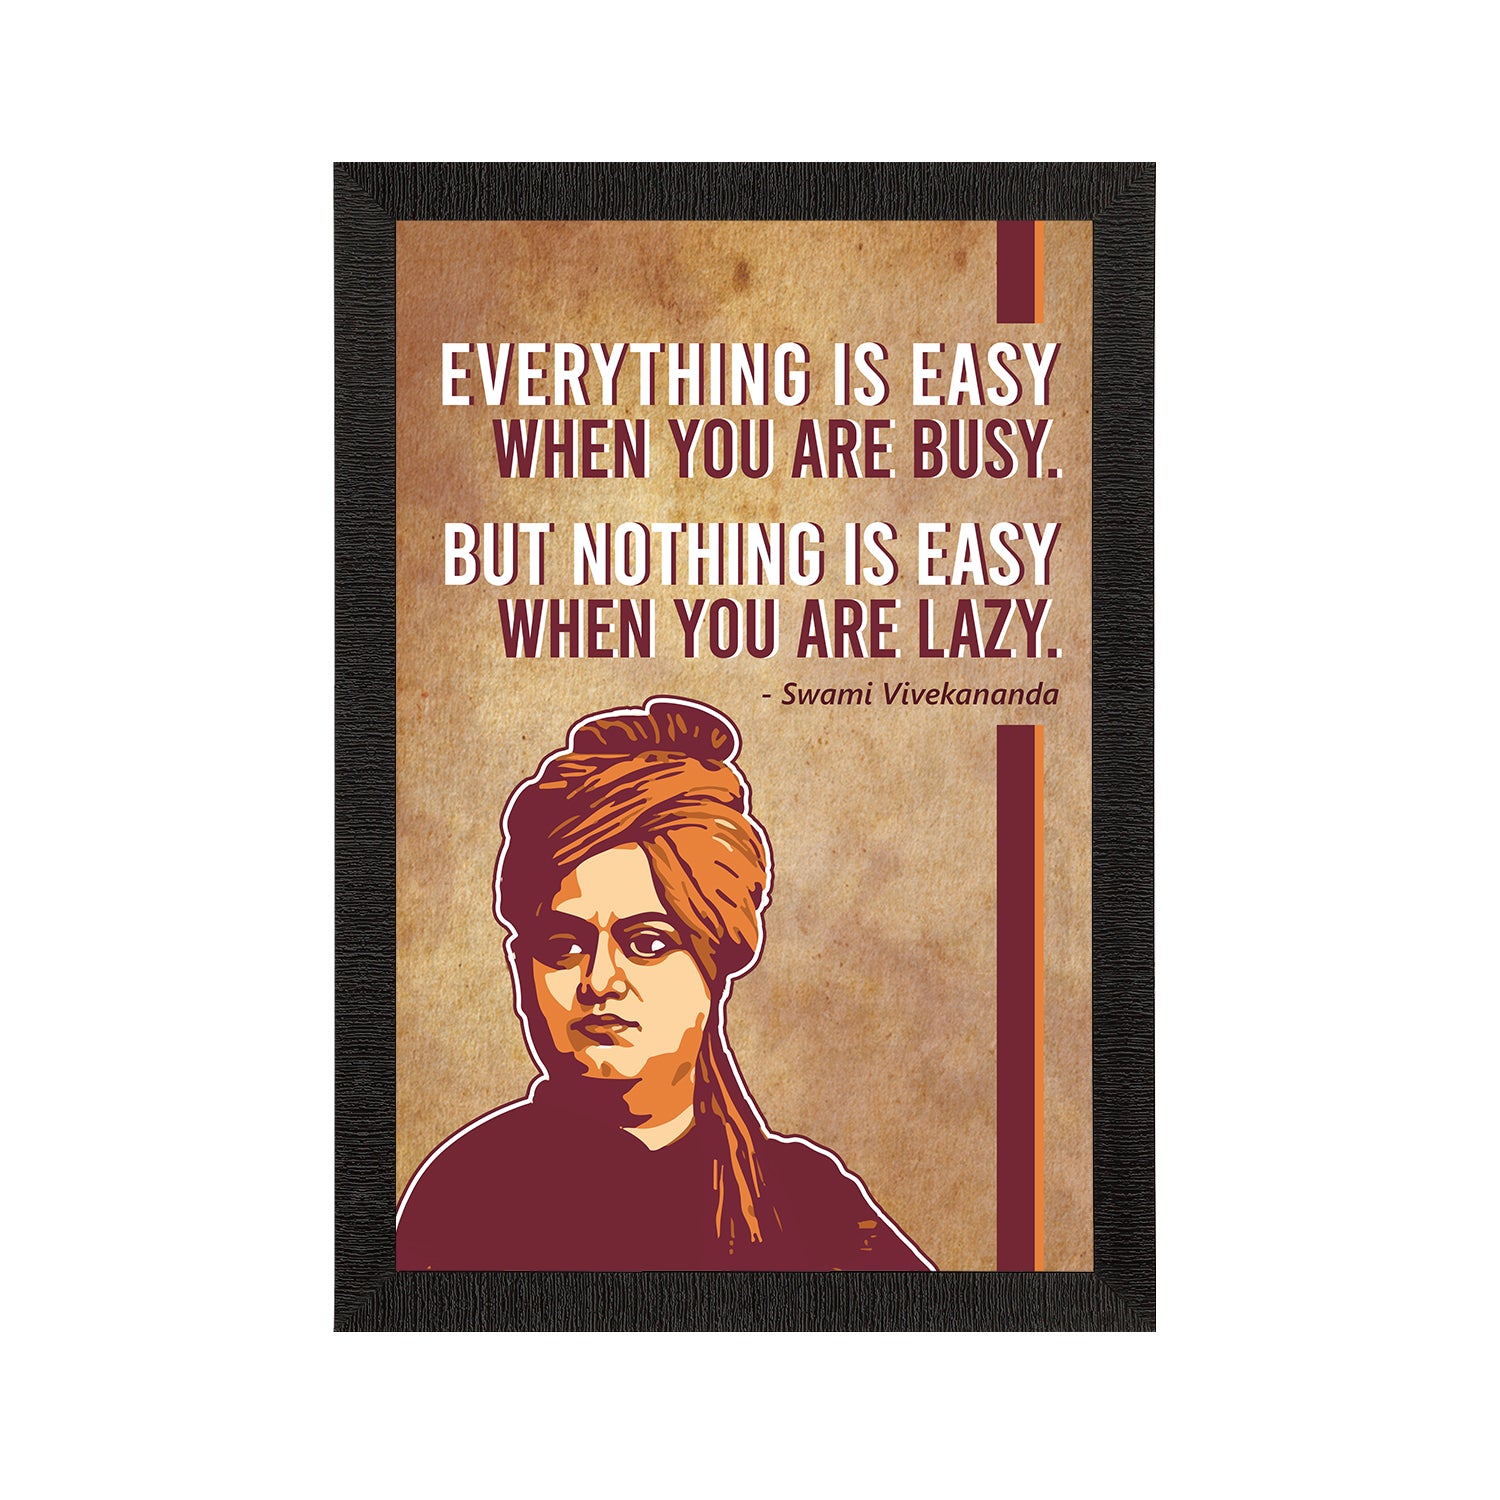 Everything Is Easy When You Are Busy, But Nothing Is Easy When You Are Lazy Swami Vivekananda Motivational Quote Painting